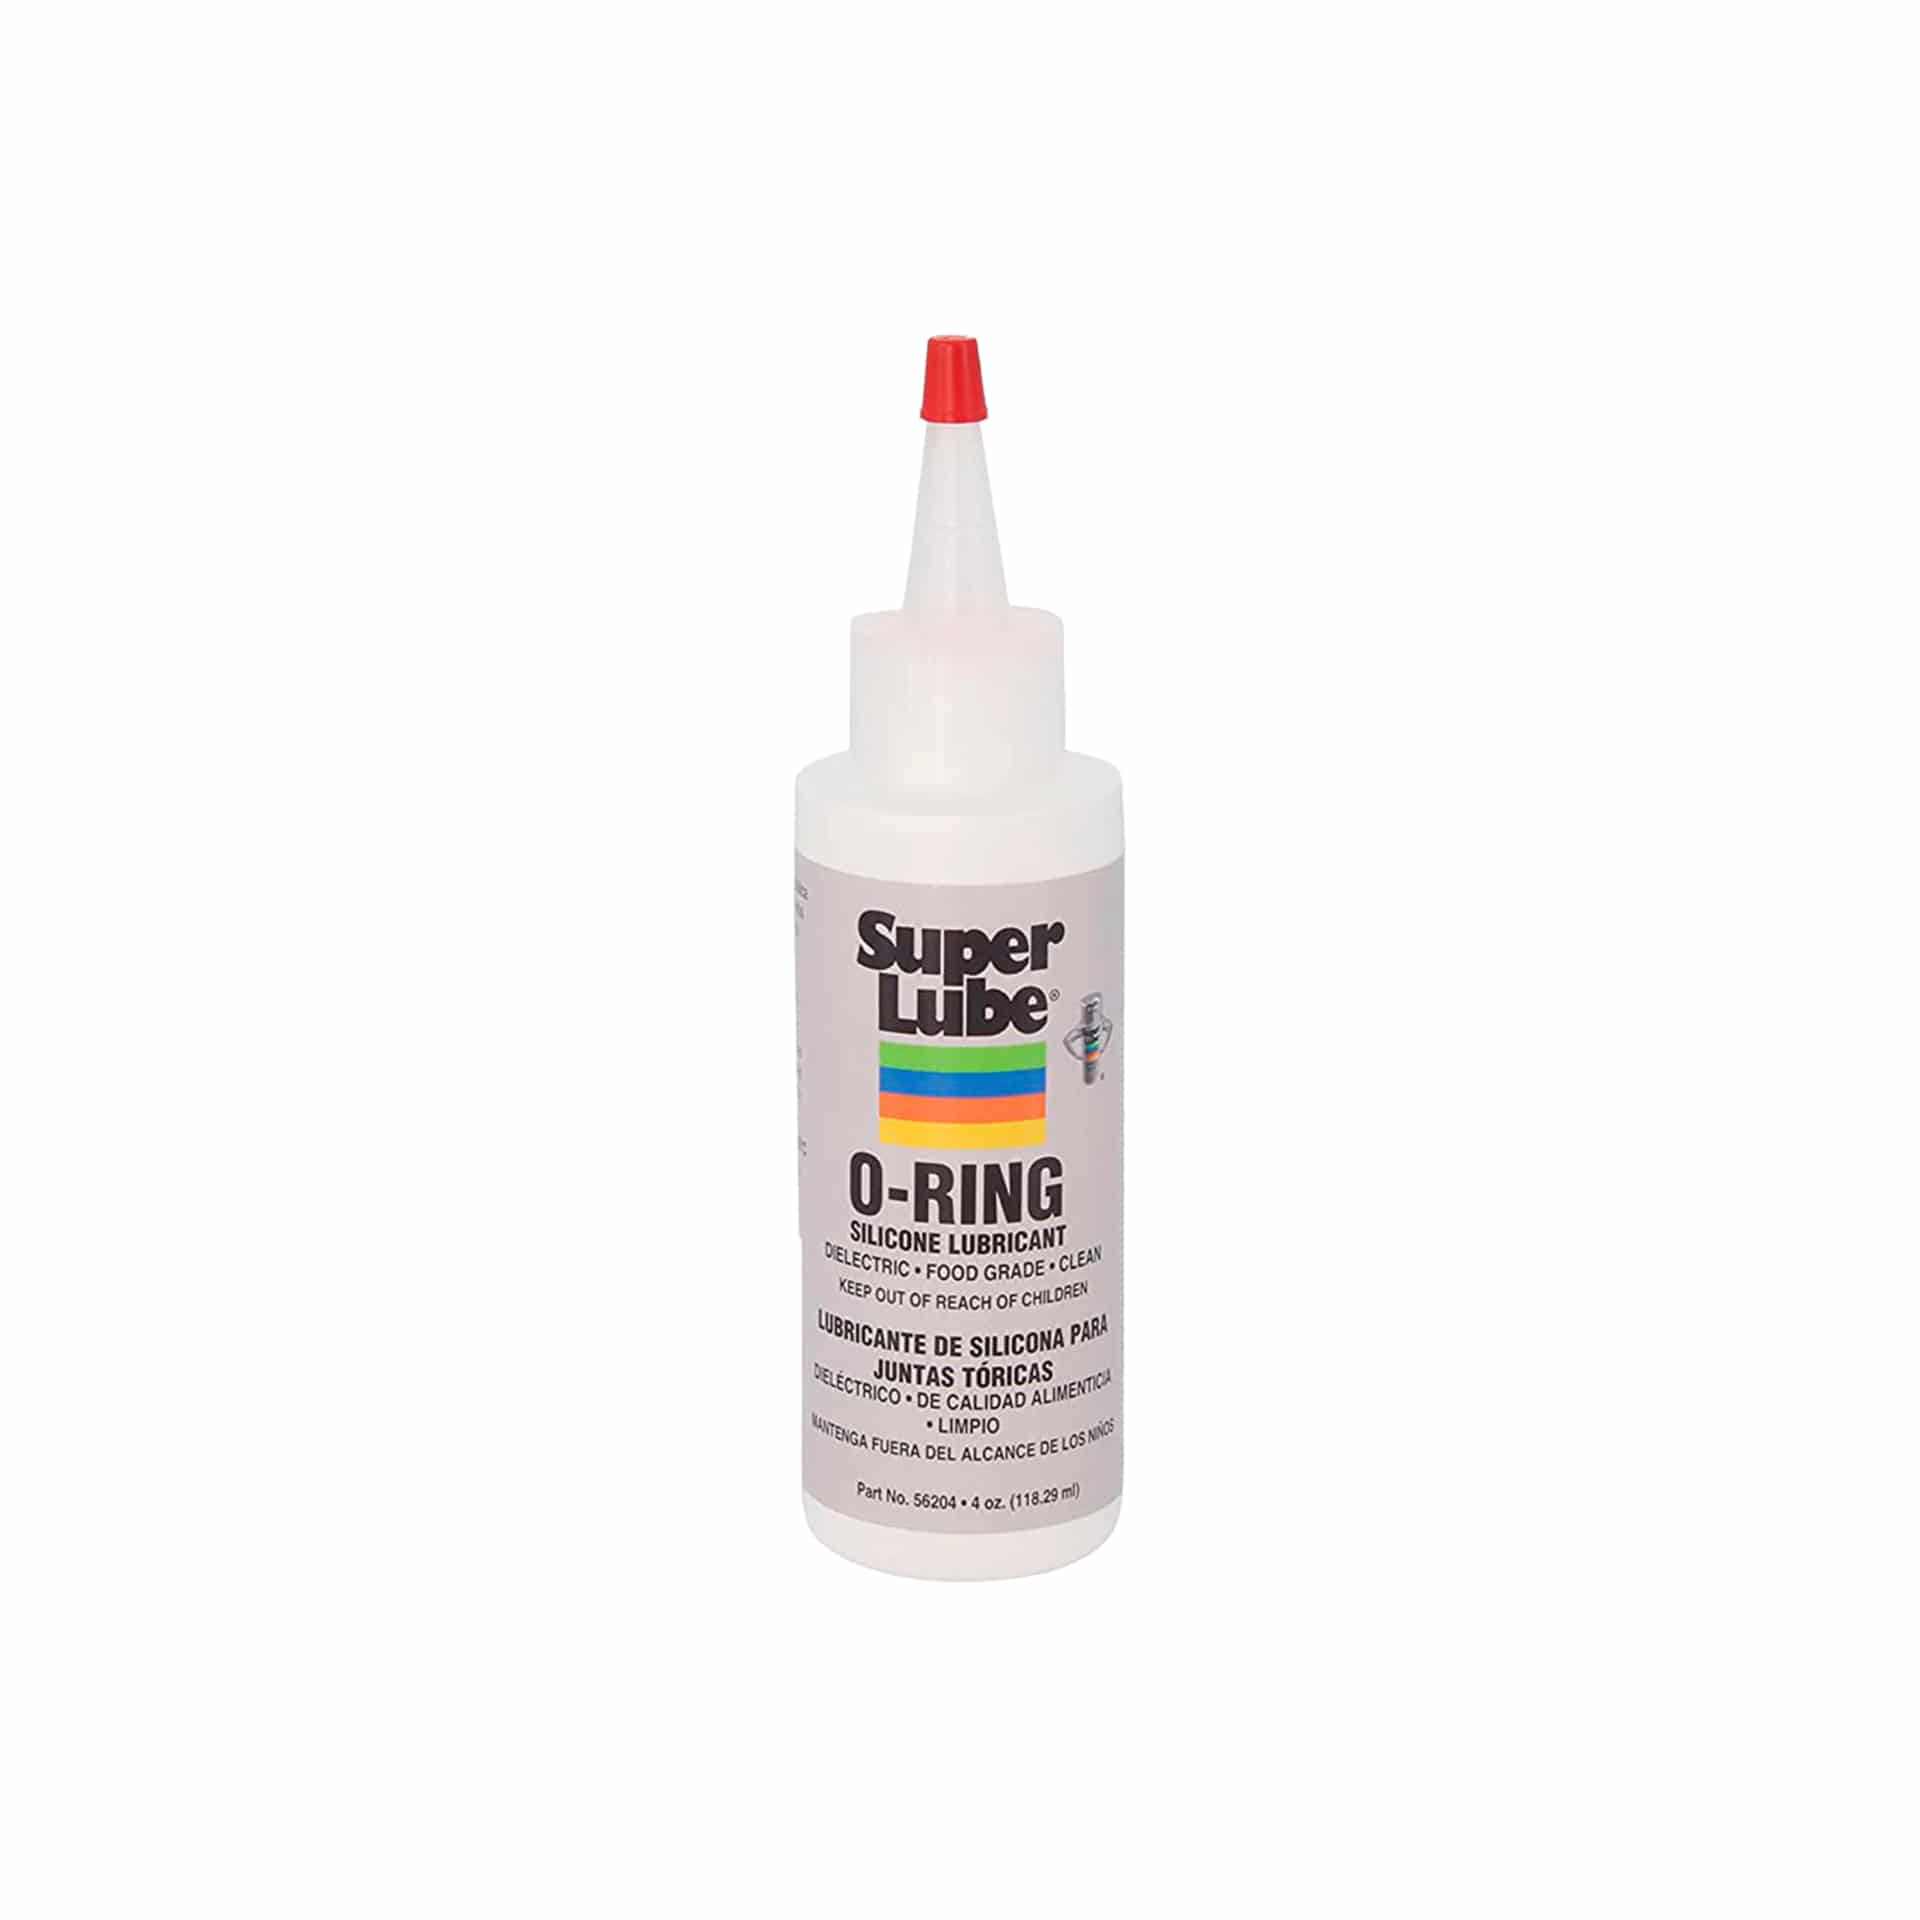 O-ring silicone lubricant